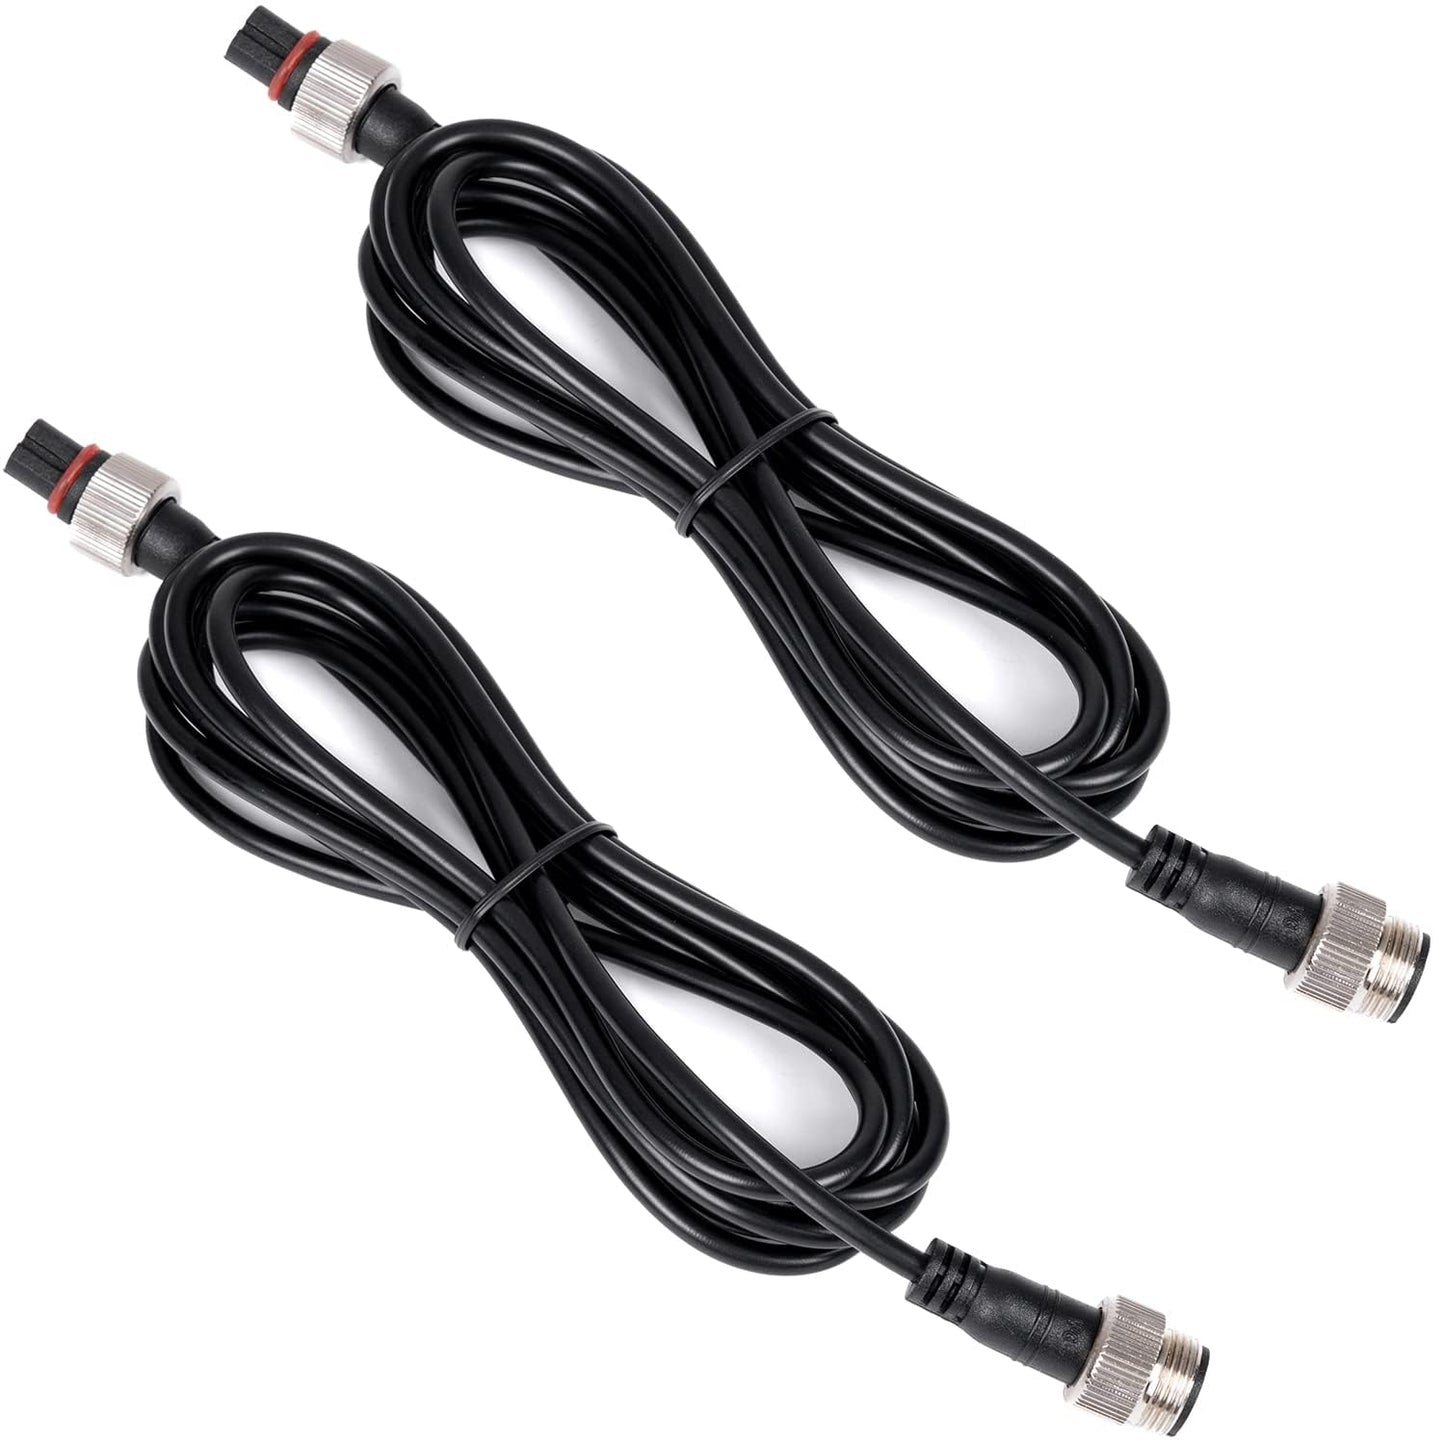 (2 Packs) 6FT 3Pin Extension Wire Cable for LED Whip Lights,Whips and Rocks Cambo Connection Kits